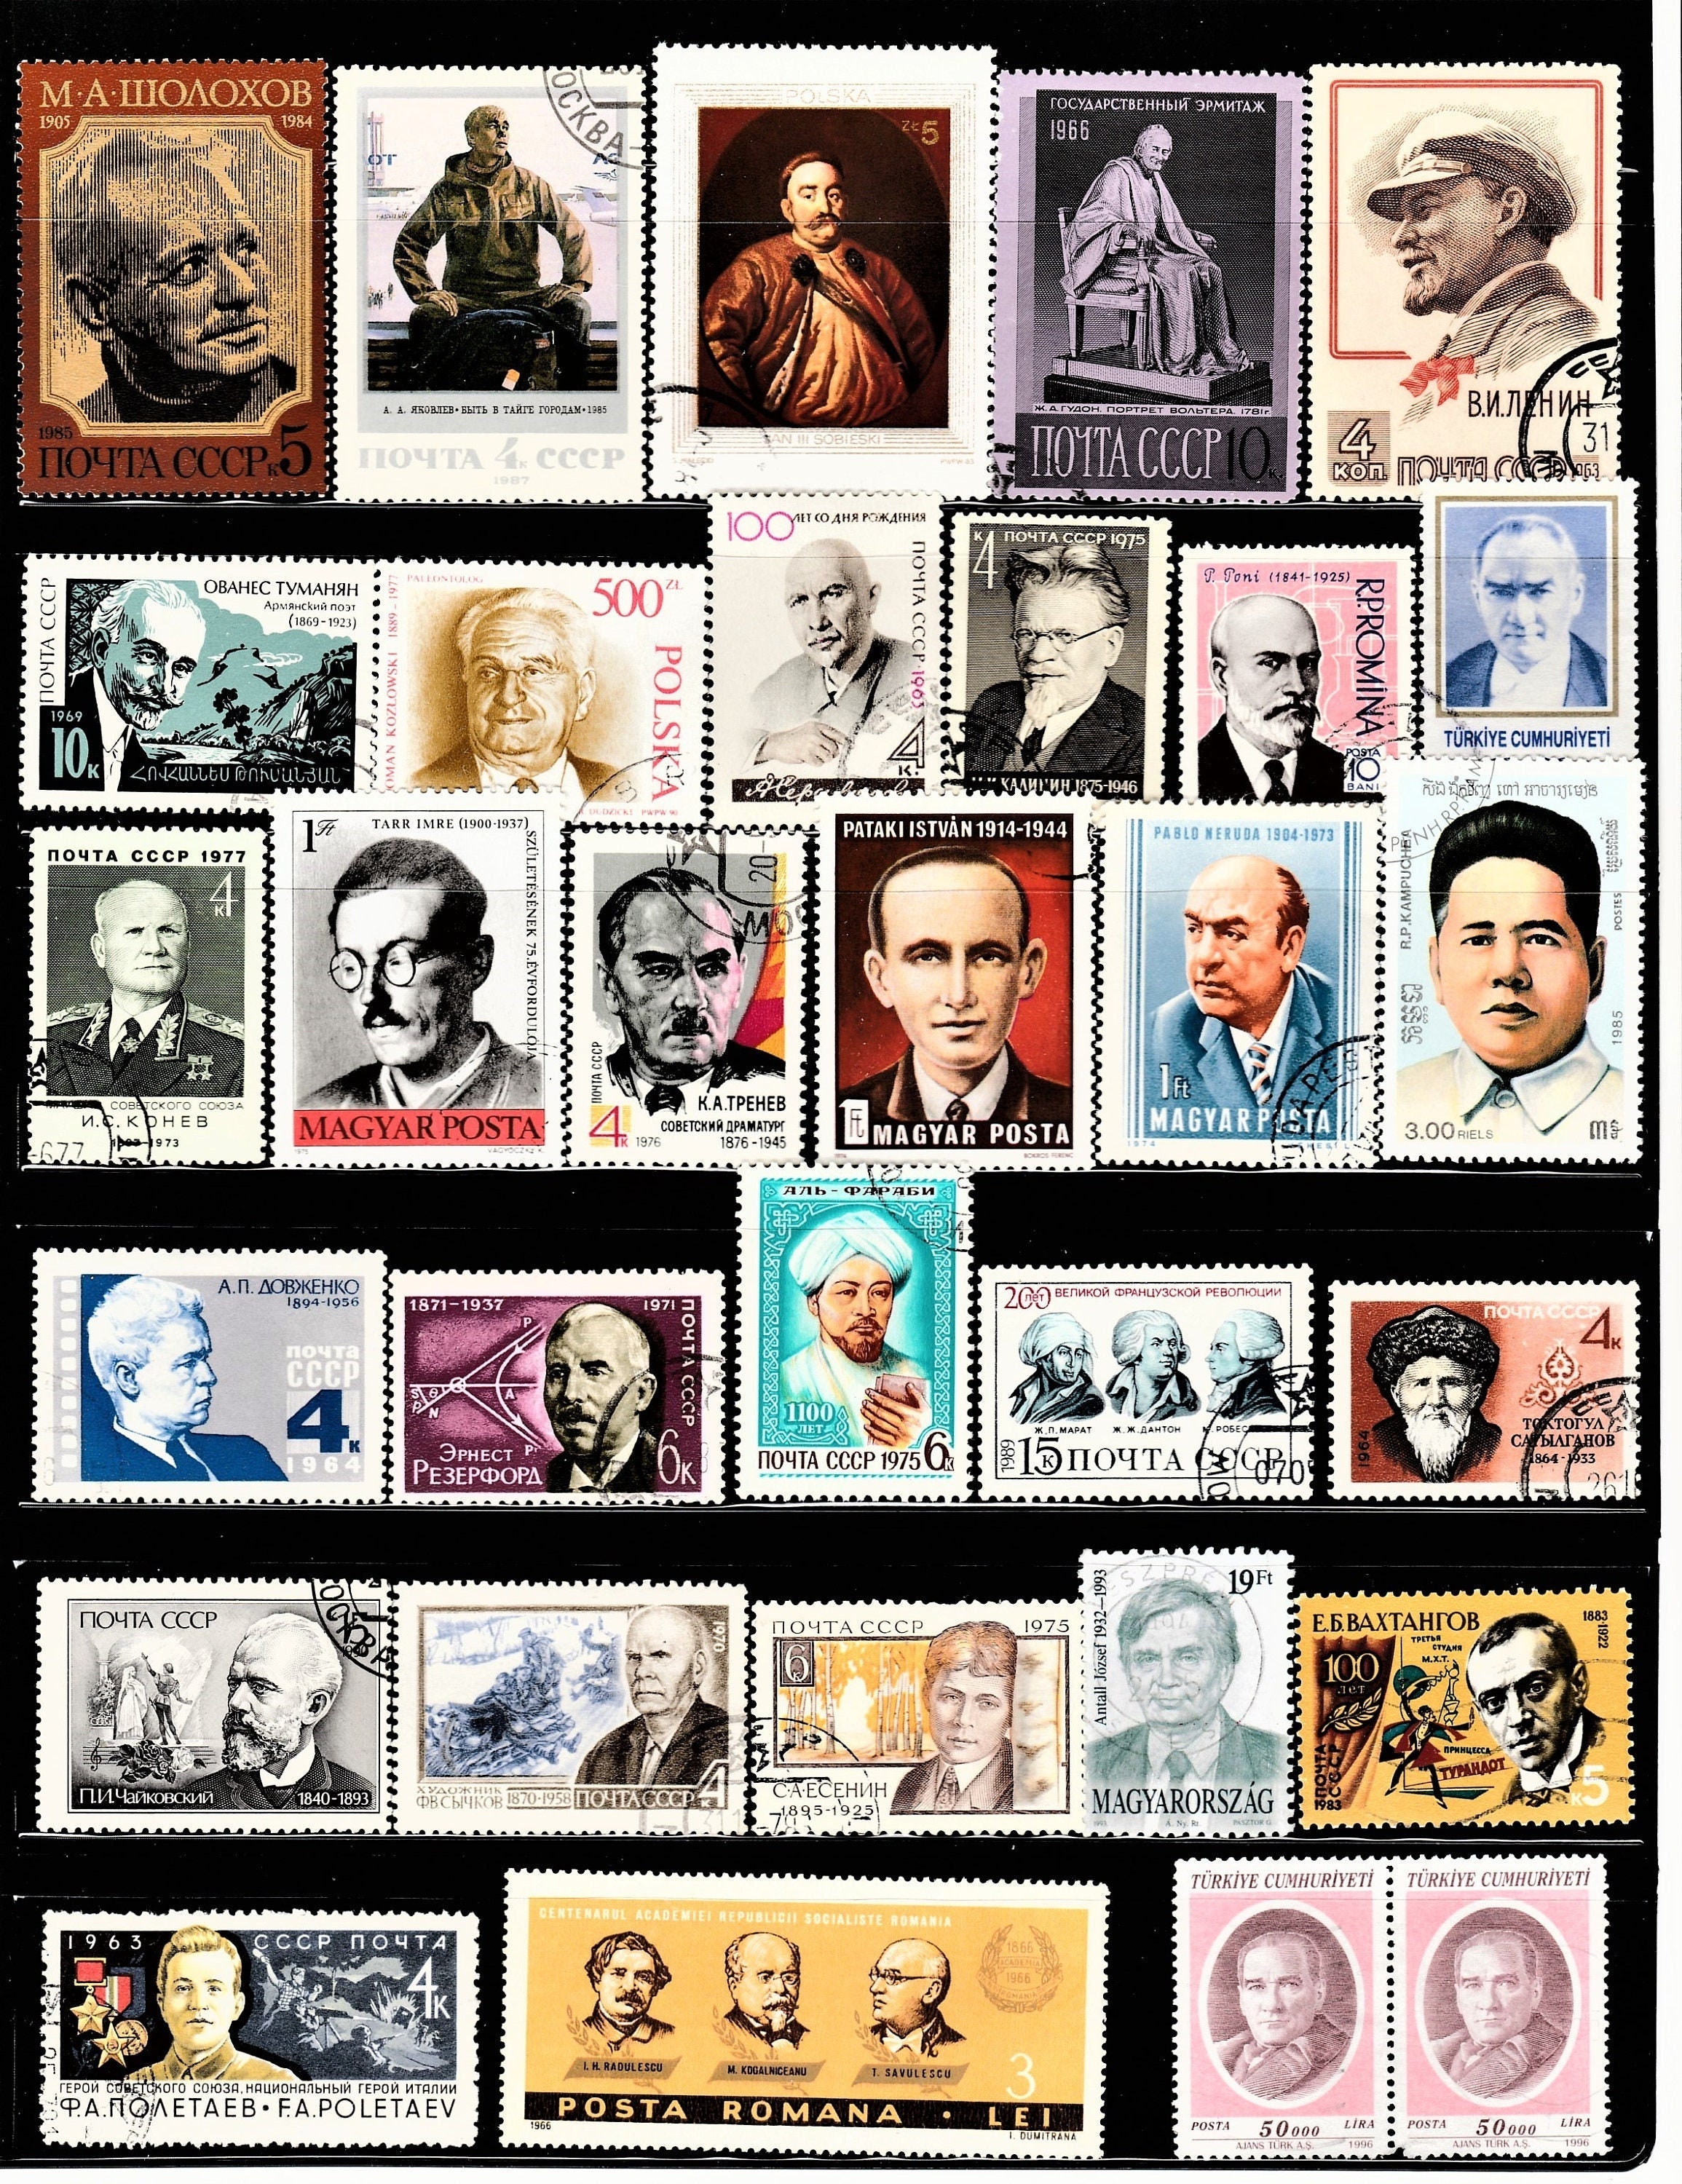 WOMEN in History and Art 45 Postage Stamps Vintage Worldwide 